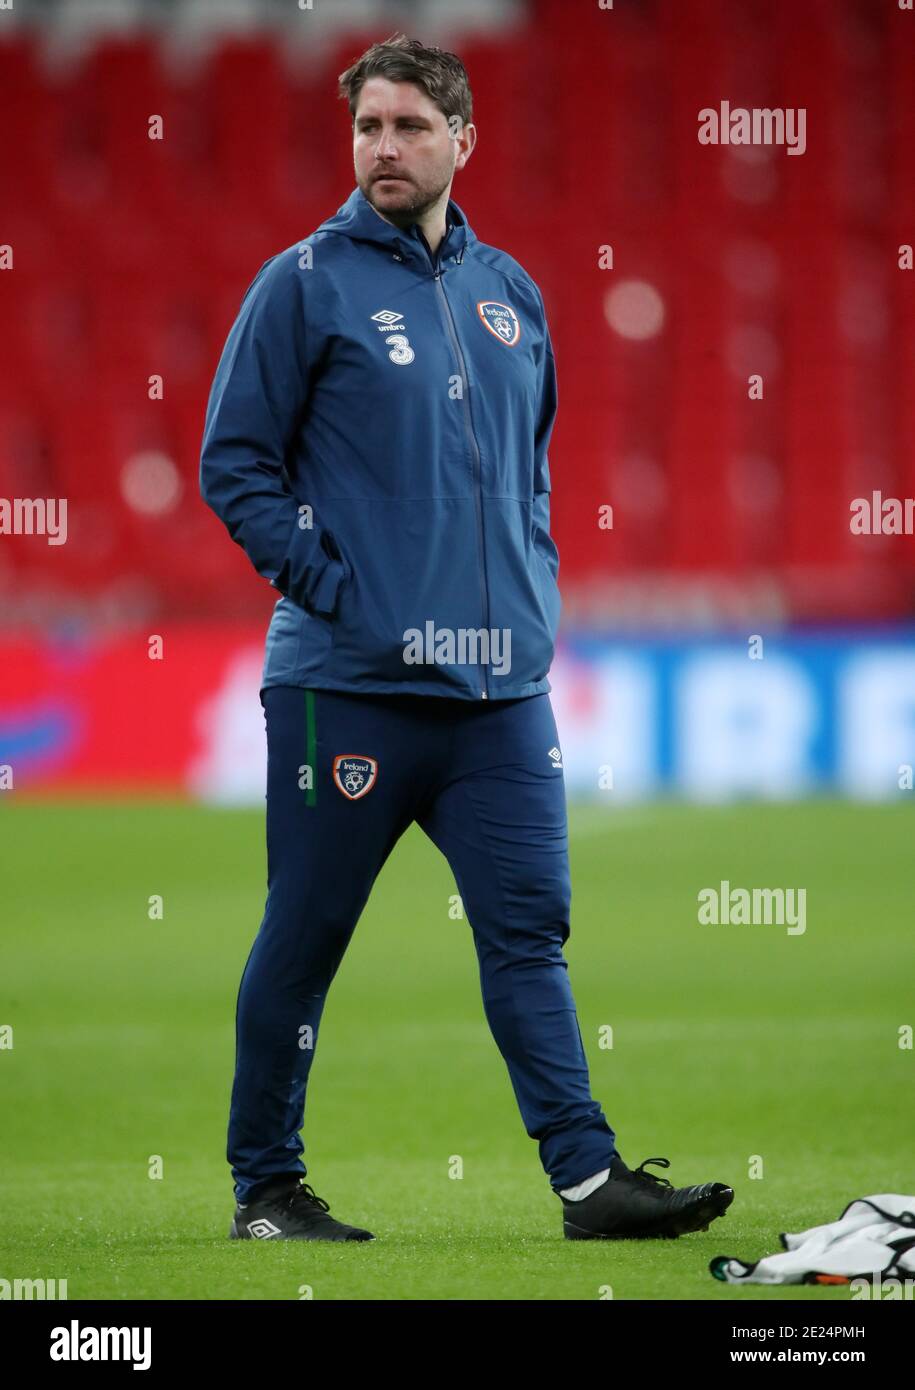 Republic of Ireland's Chief Scout and Oppostion Analyst Ruaidhri Higgins during the international friendly at Wembley Stadium, London. Stock Photo